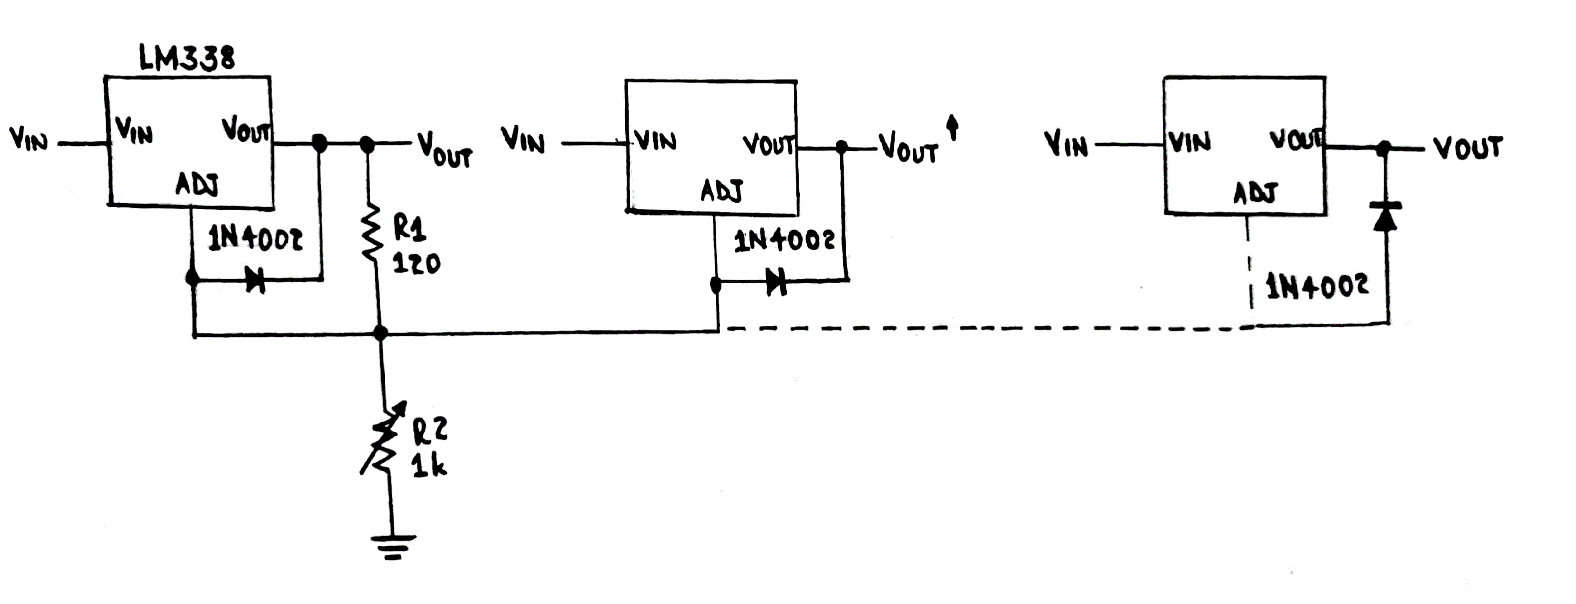 A circuit diagram of many IC LM338 modules using a single control 